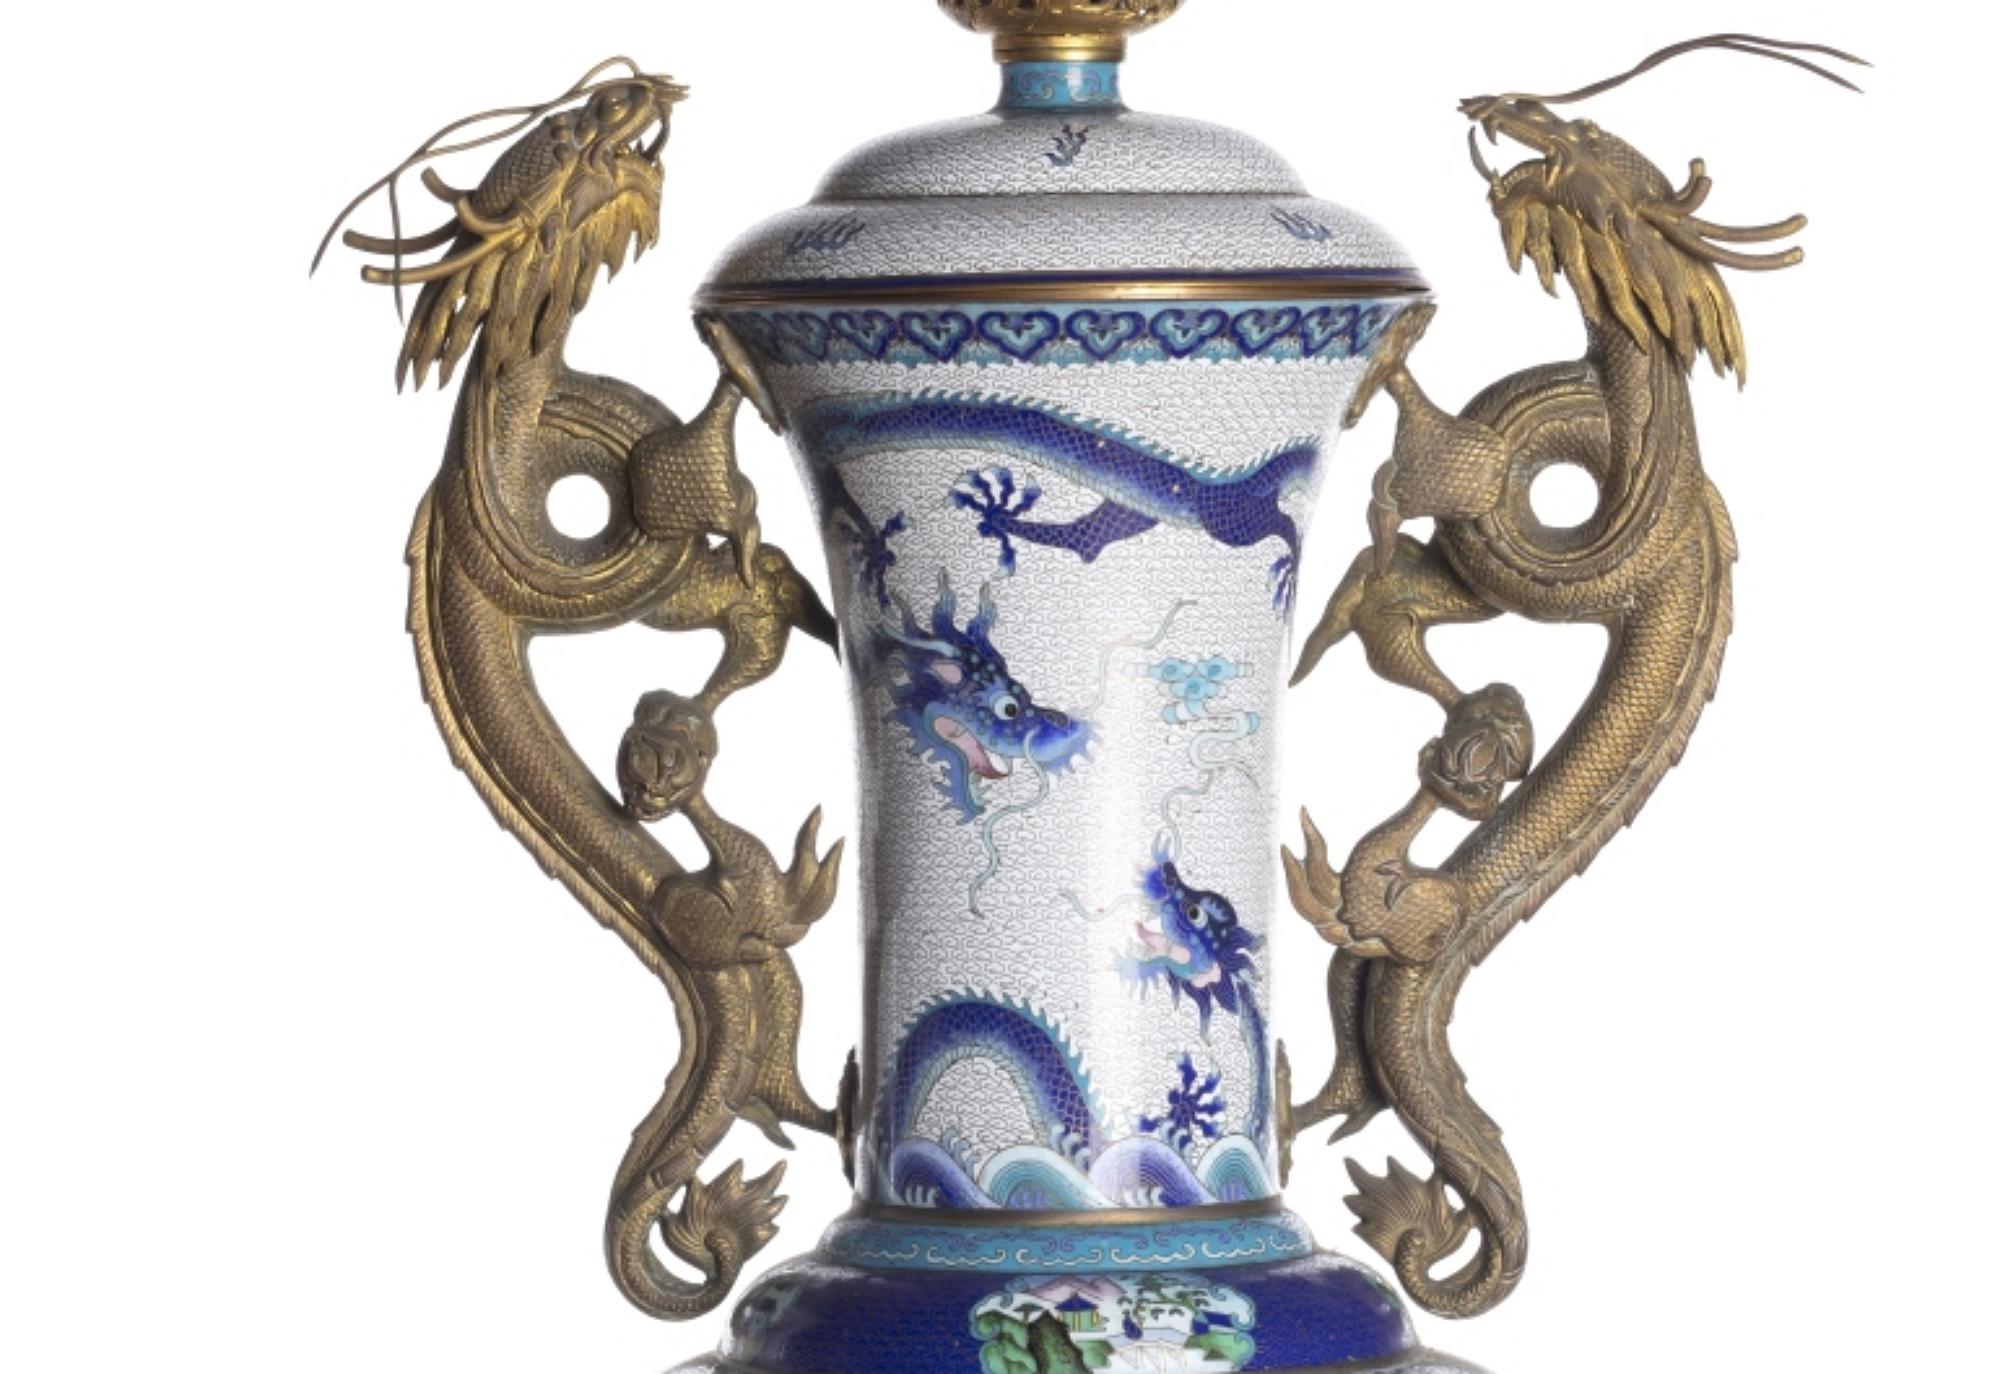 POT WITH LID

Chinese
 19th century,
 in cloisonné metal, decoration in shades of blue and polychrome with dragons and dragon-shaped handles in relief bronze. 
Wooden base. 
Height: (Vase) 61 cm. Height: (total) 70 cm.
very good condition.